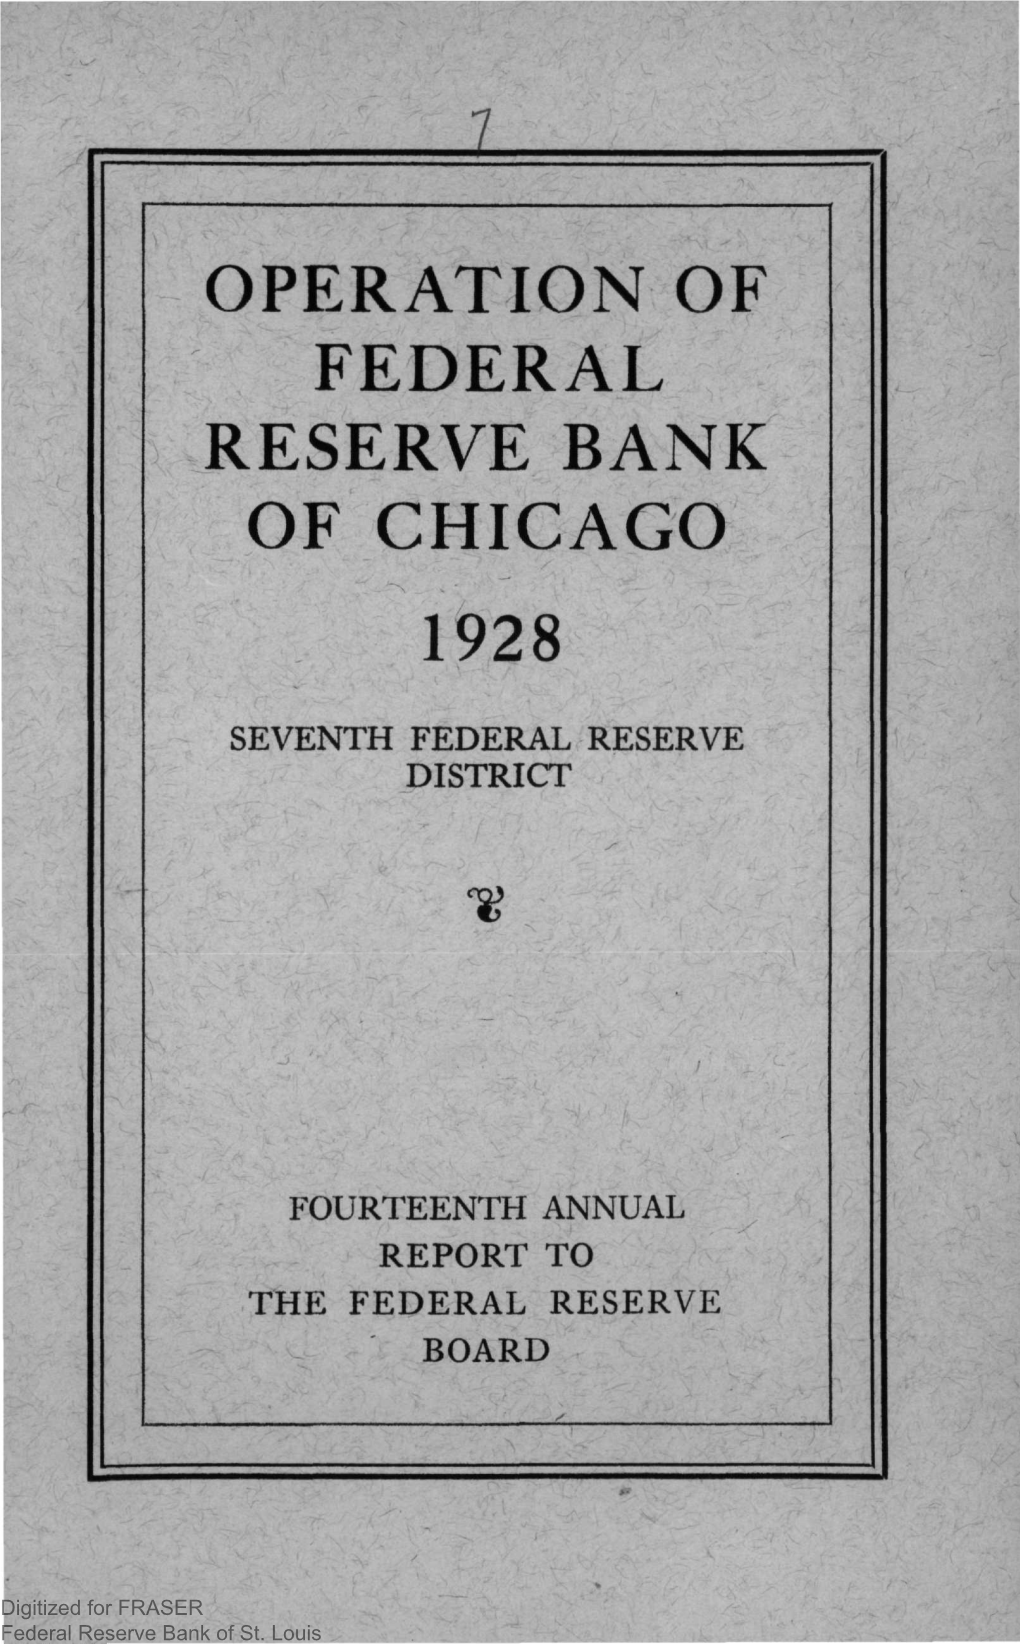 Federal Reserve Bank of Chicago Annual Report